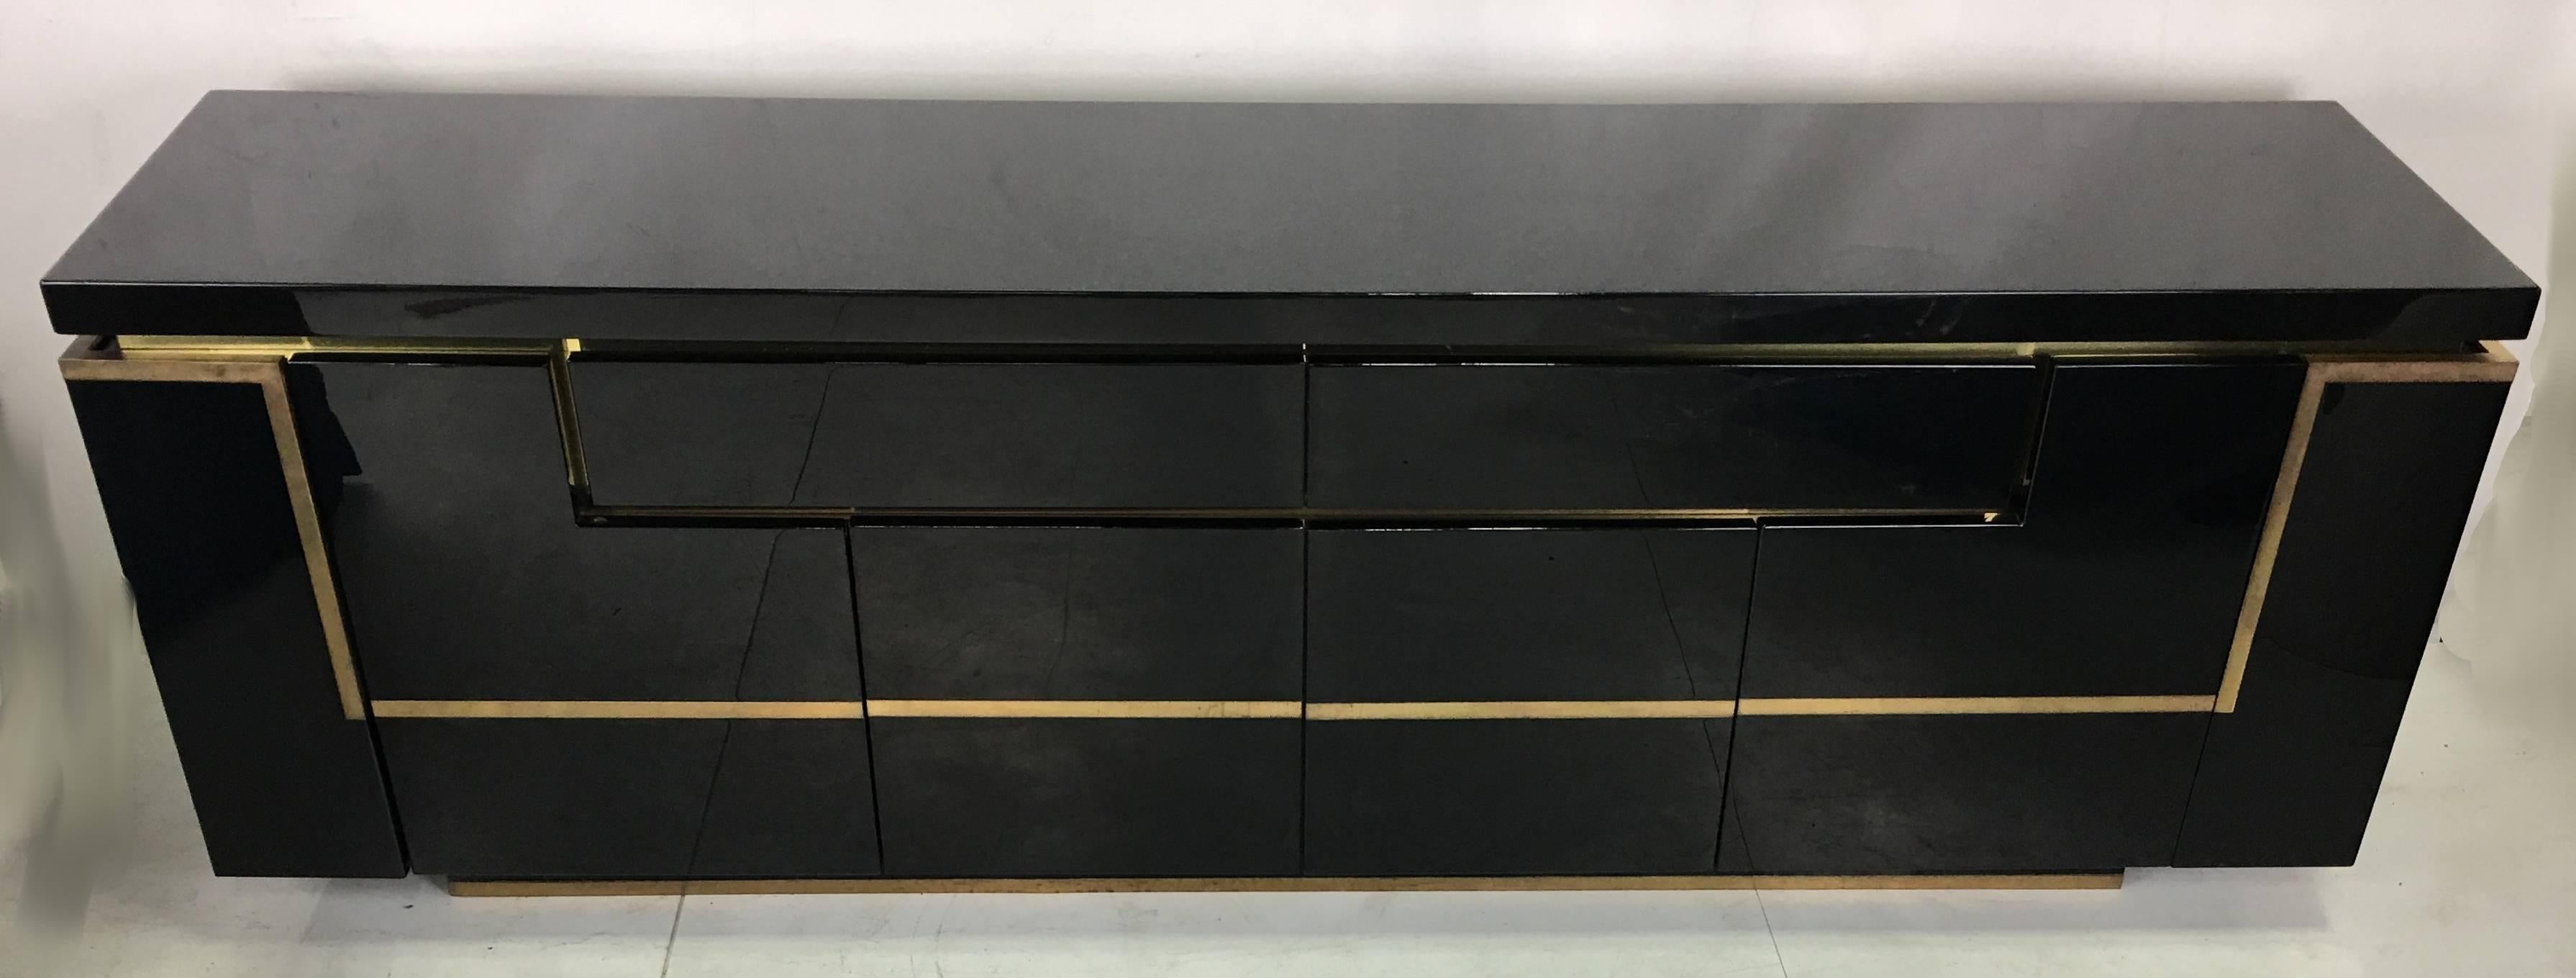 Luxurious sideboard in Seventies jet set style by Jean-Claude Mahey.  Lacquered high gloss front and top in black with brass applications.  The sideboard has two drawers, four doors and two bar doors at the sides.  The piece is in excellent original